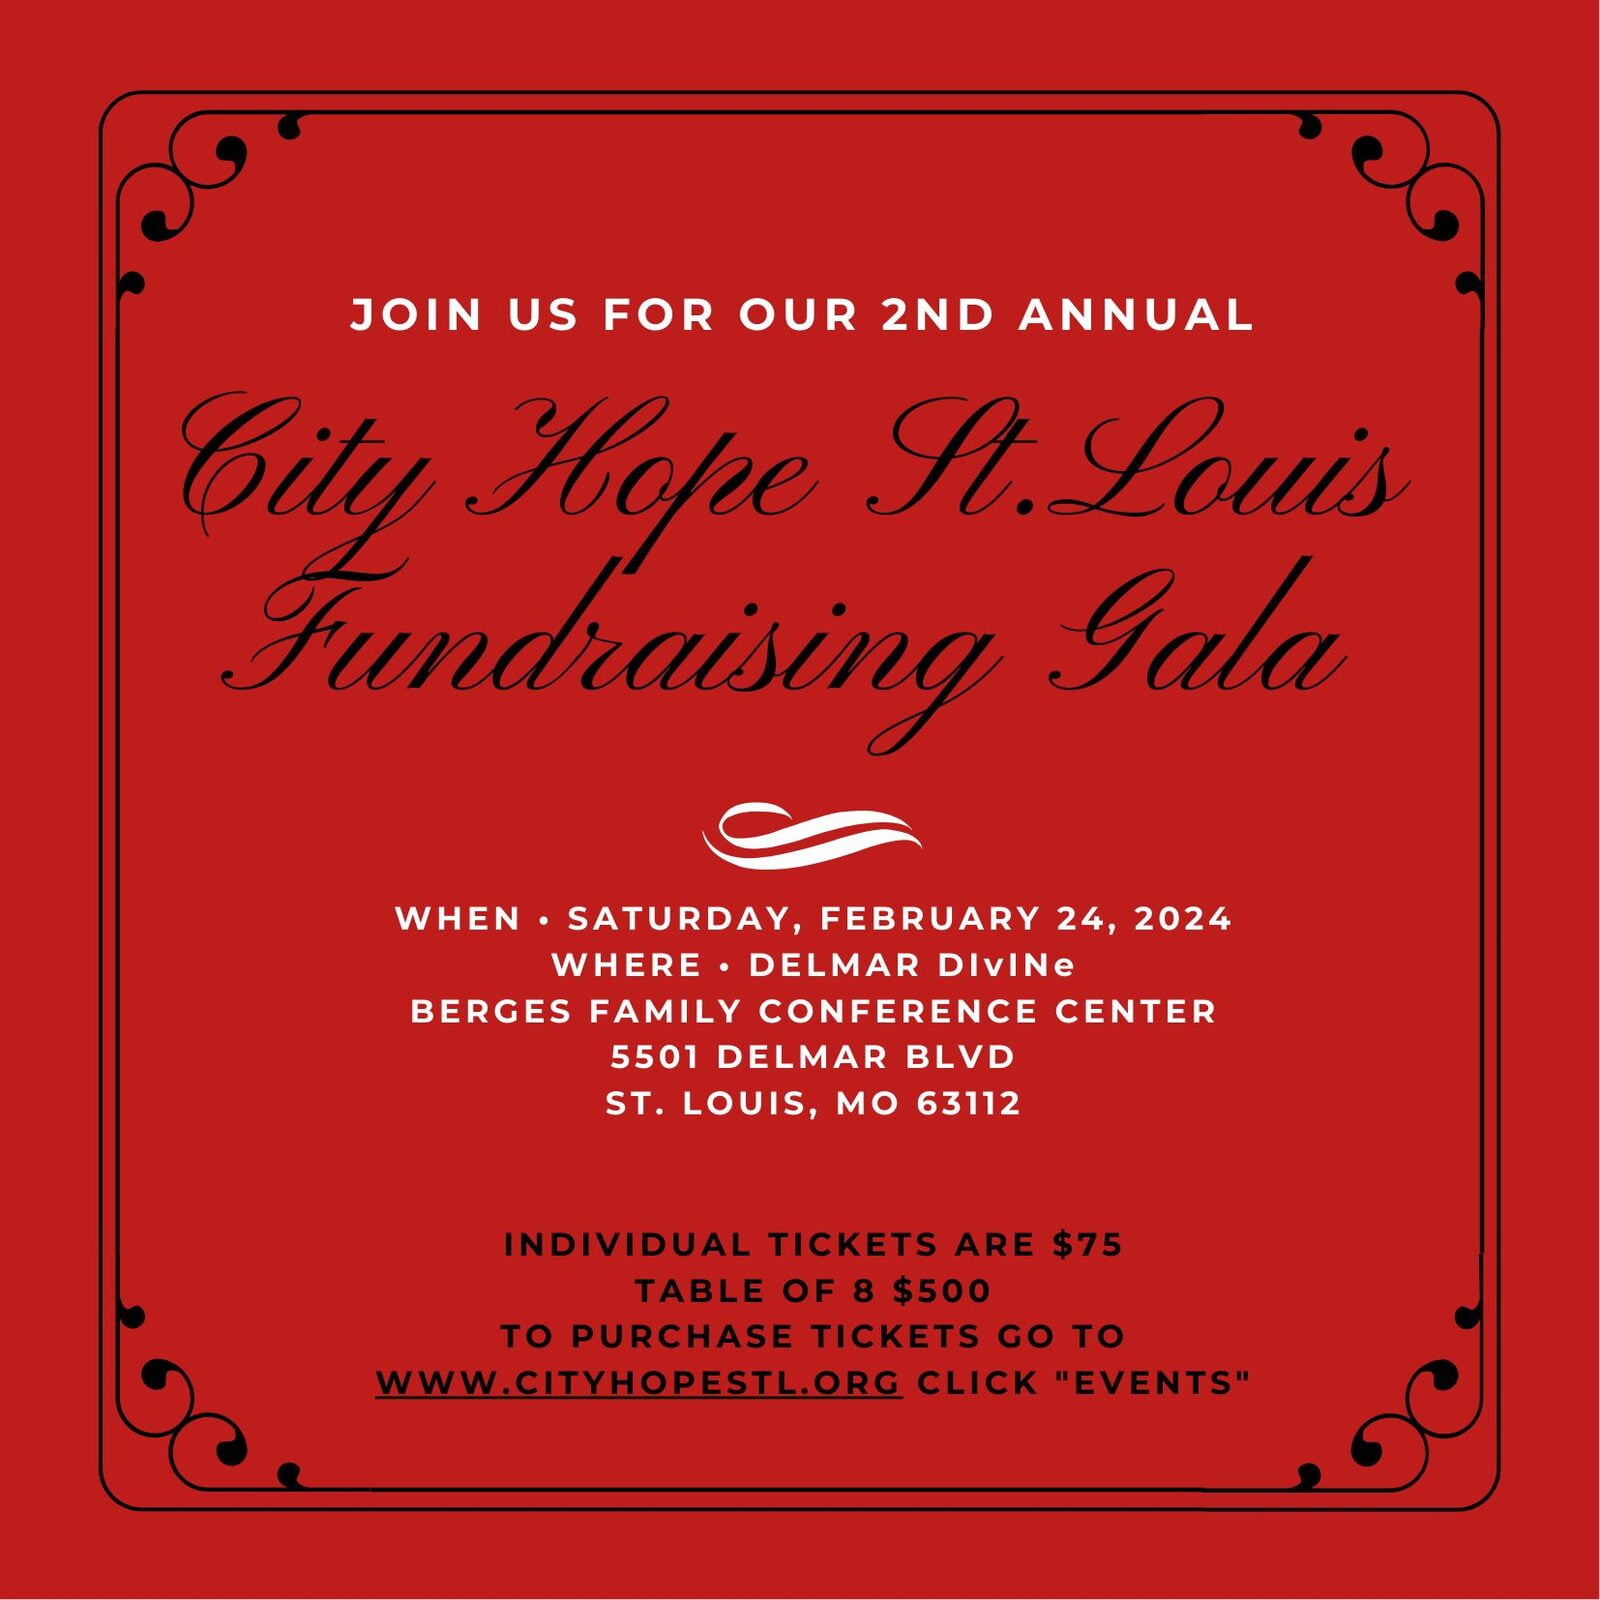 City Hope St. Louis 2nd Annual Fundraiser Gala